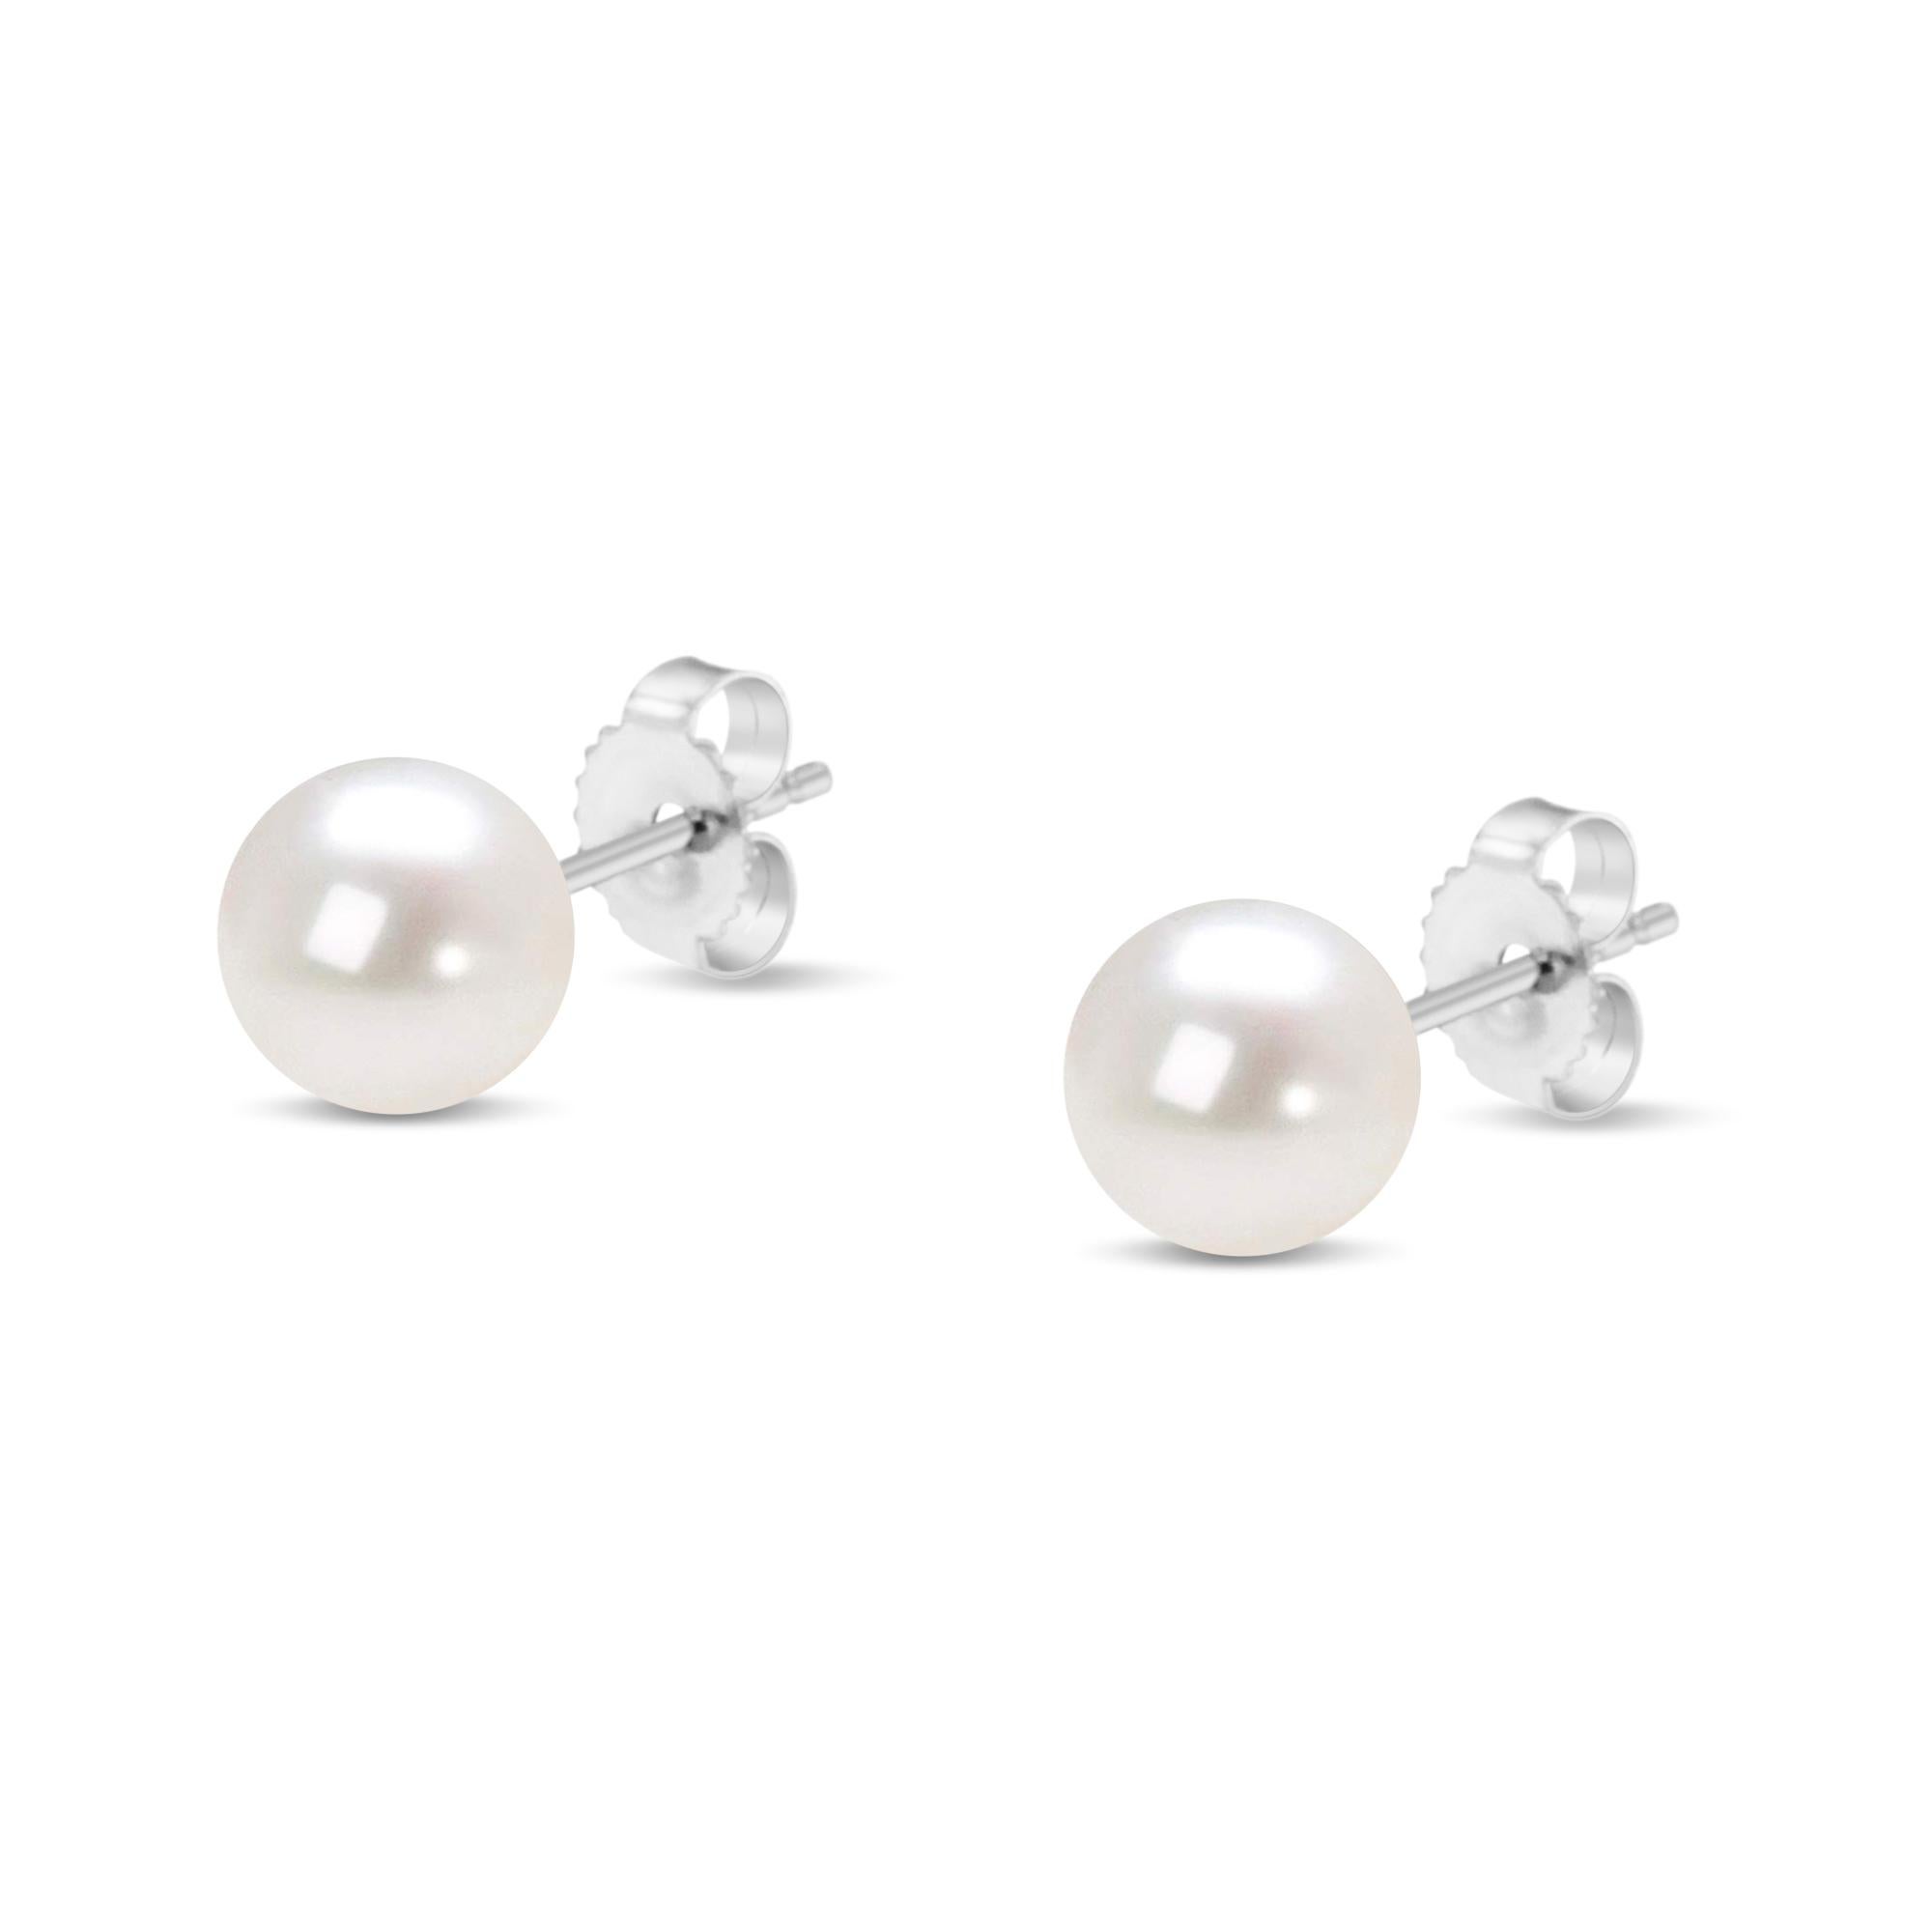 Round Cut 14K White Gold Round Freshwater Akoya Cultured Pearl Stud Earrings AAA+ Quality For Sale